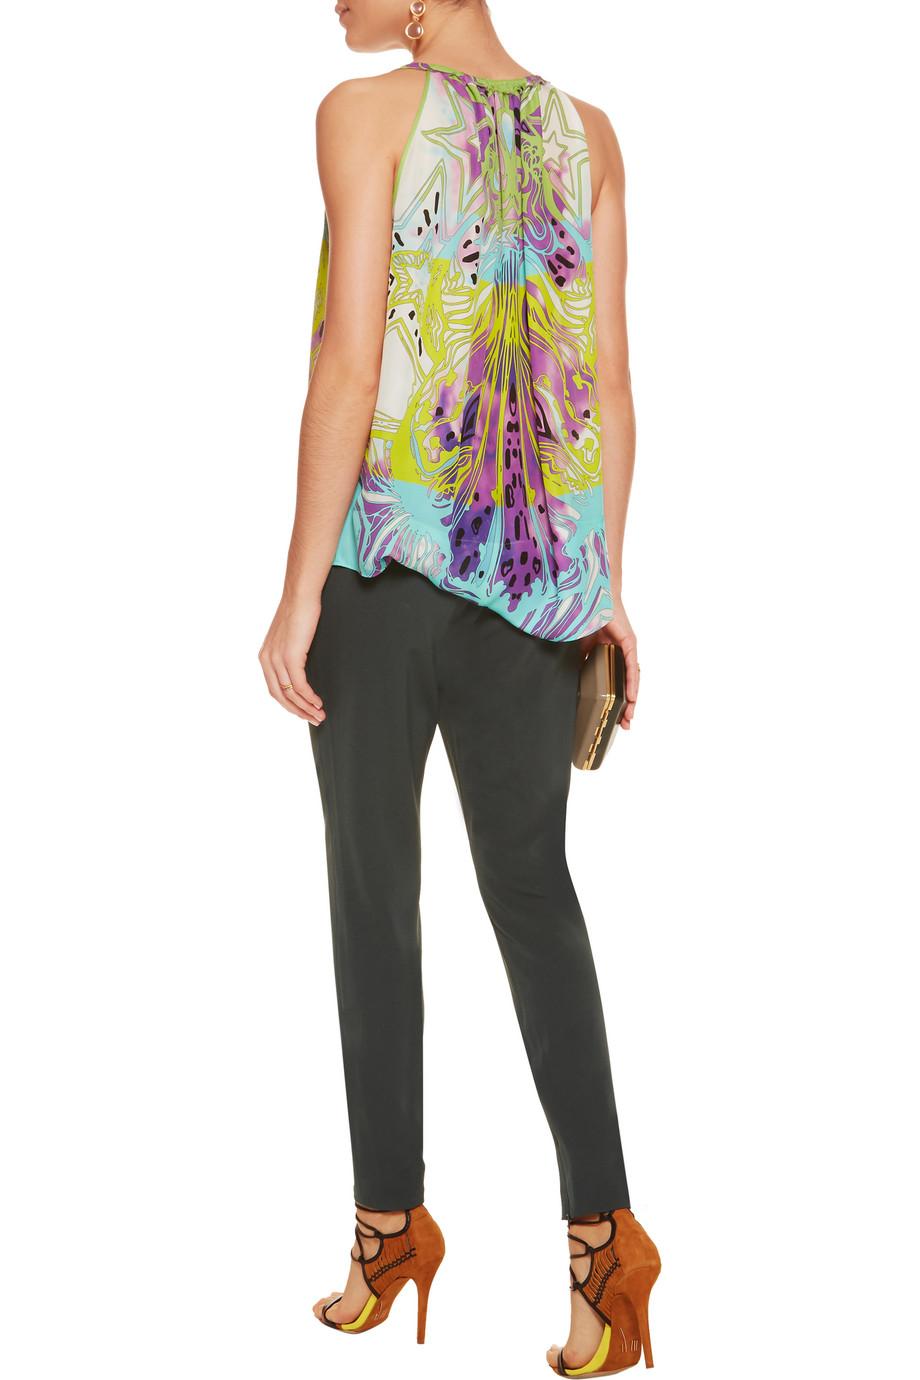 NEW Emilio Pucci Tie Dye Silk Star Print Top Shirt Sleeveless Blouse Tunic 40 For Sale 6